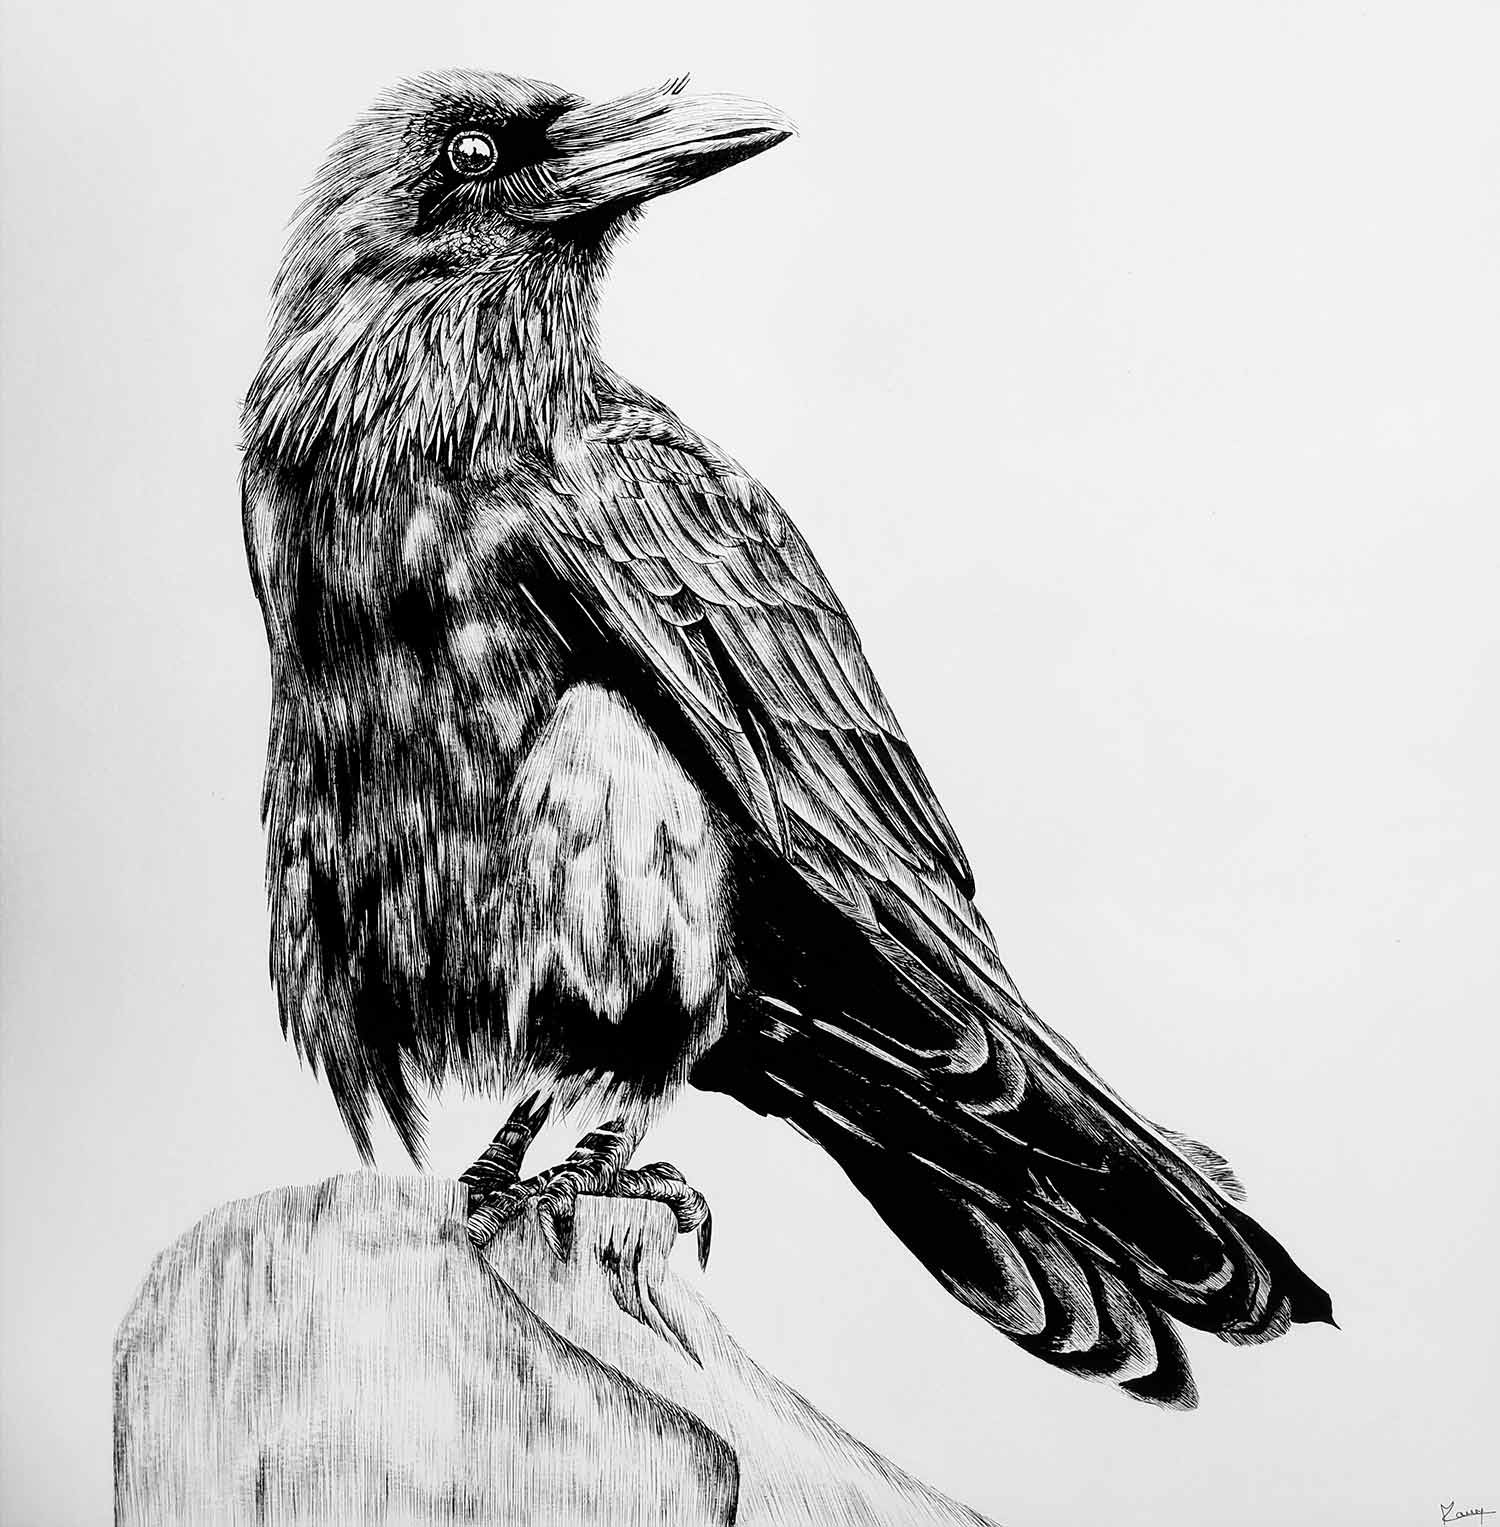 Contemporary Art - Drawing - Corbeau large - Lucile Maury